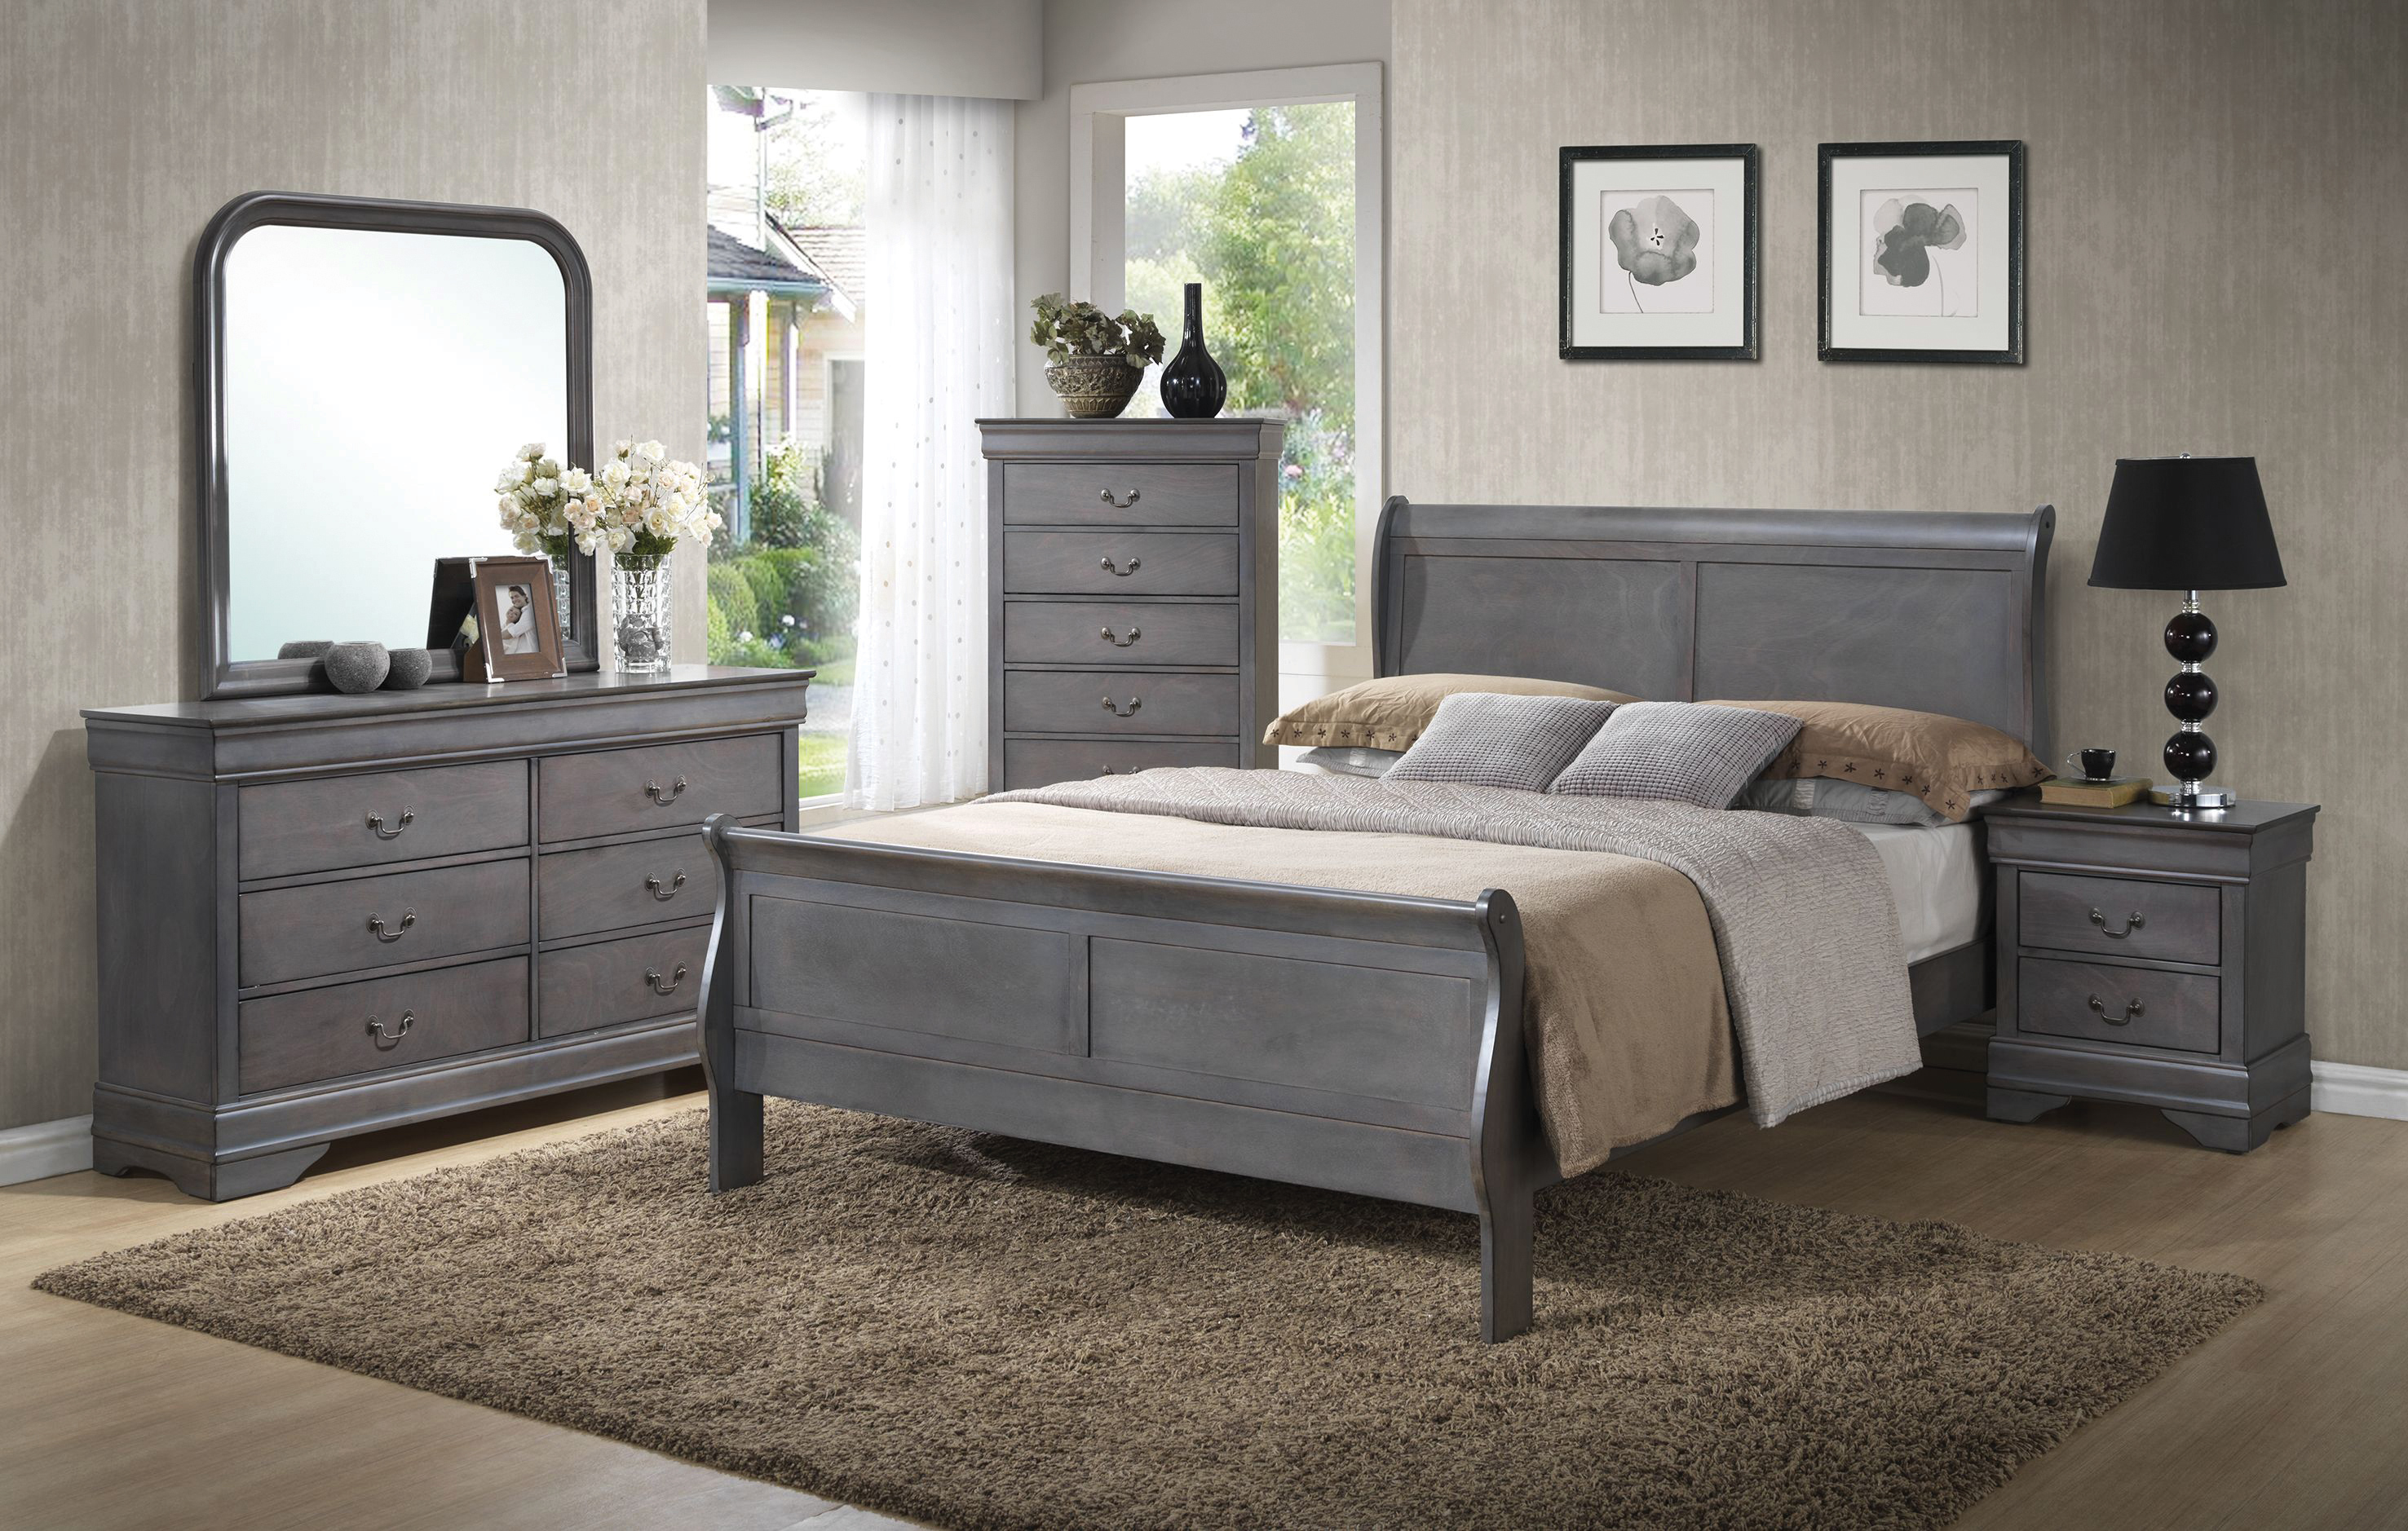 C4934A Grey Louis Philippe Bedroom – AWFCO Catalog Site